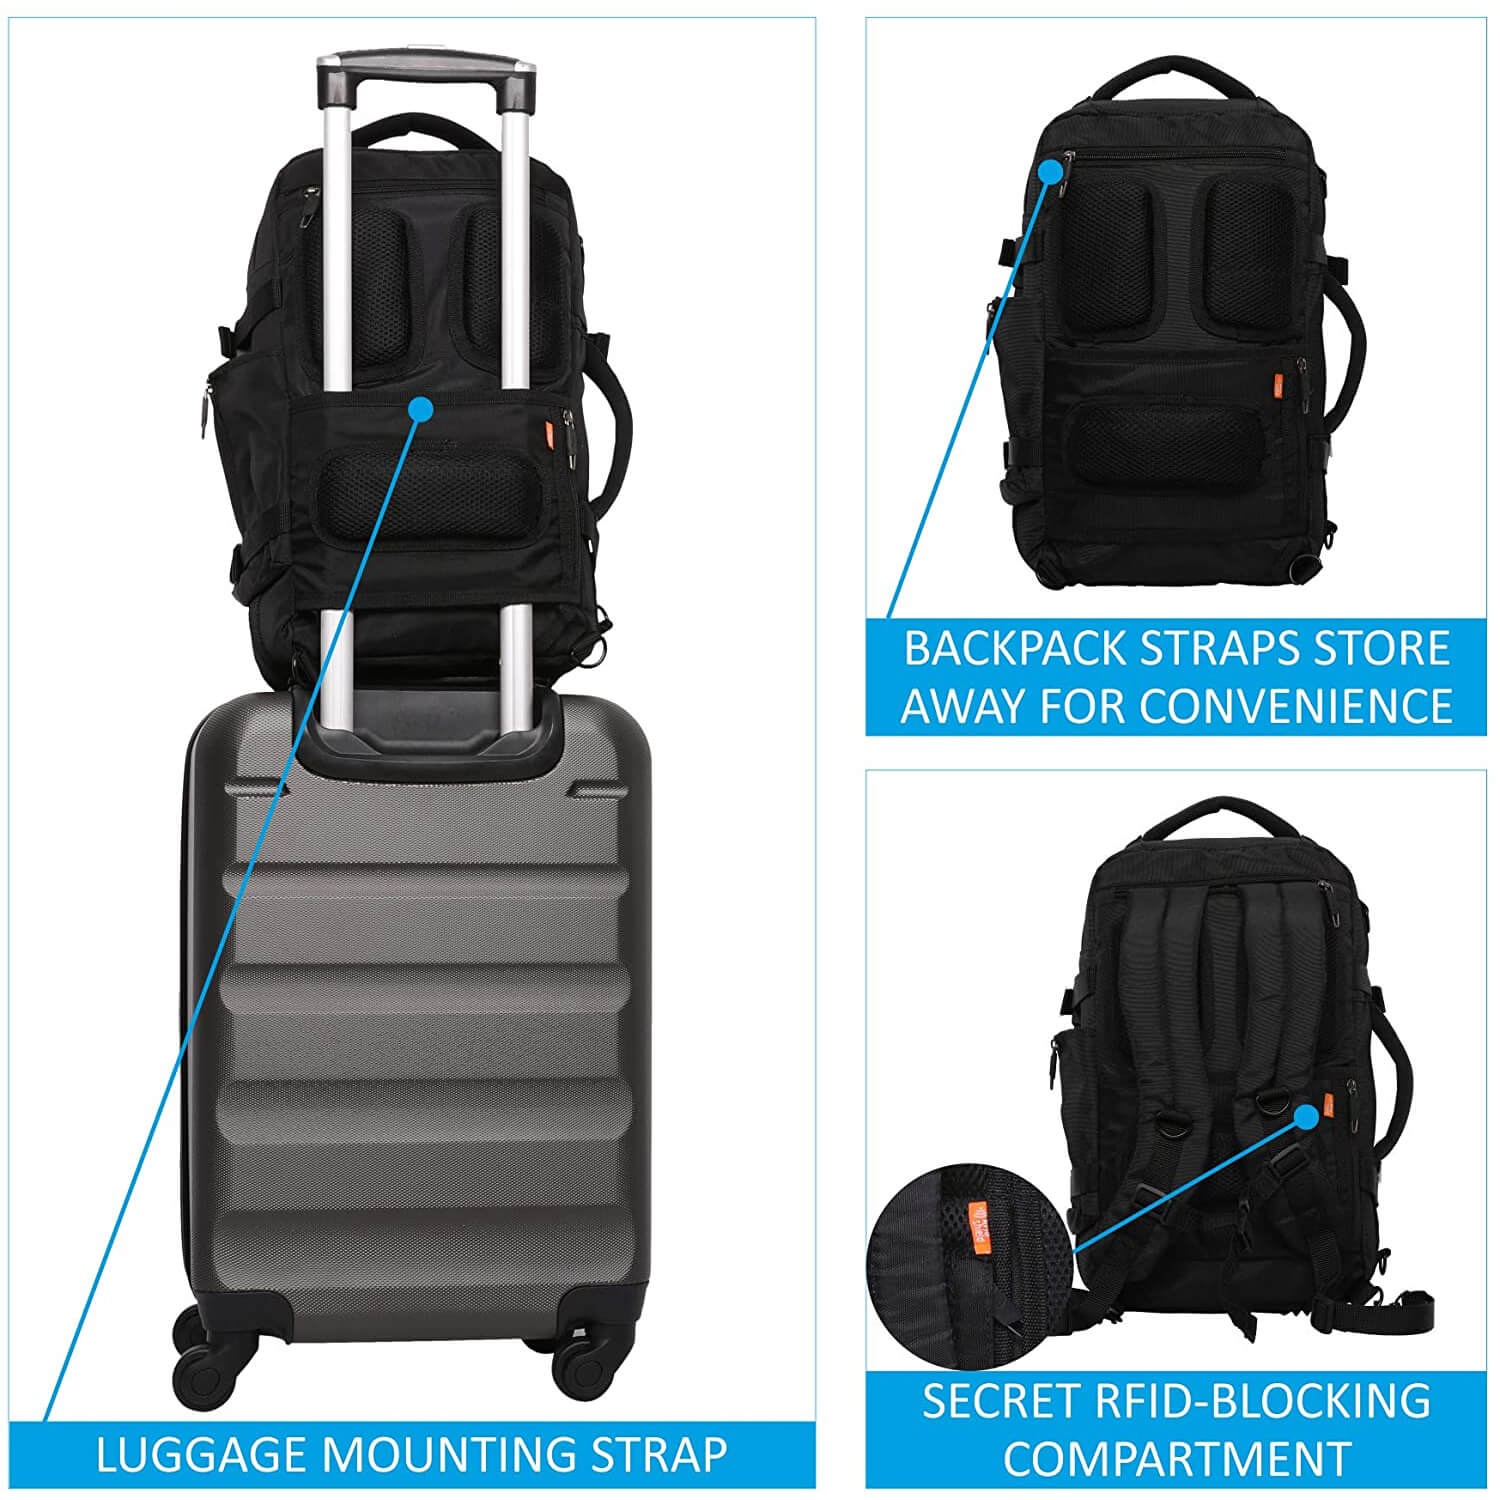 Aerolite (40x20x25cm) New and Improved 2024 Ryanair Maximum Size Hand Cabin Luggage/Backpack/Rucksack with YKK Zippers, Built-in USB Charging Port, Black